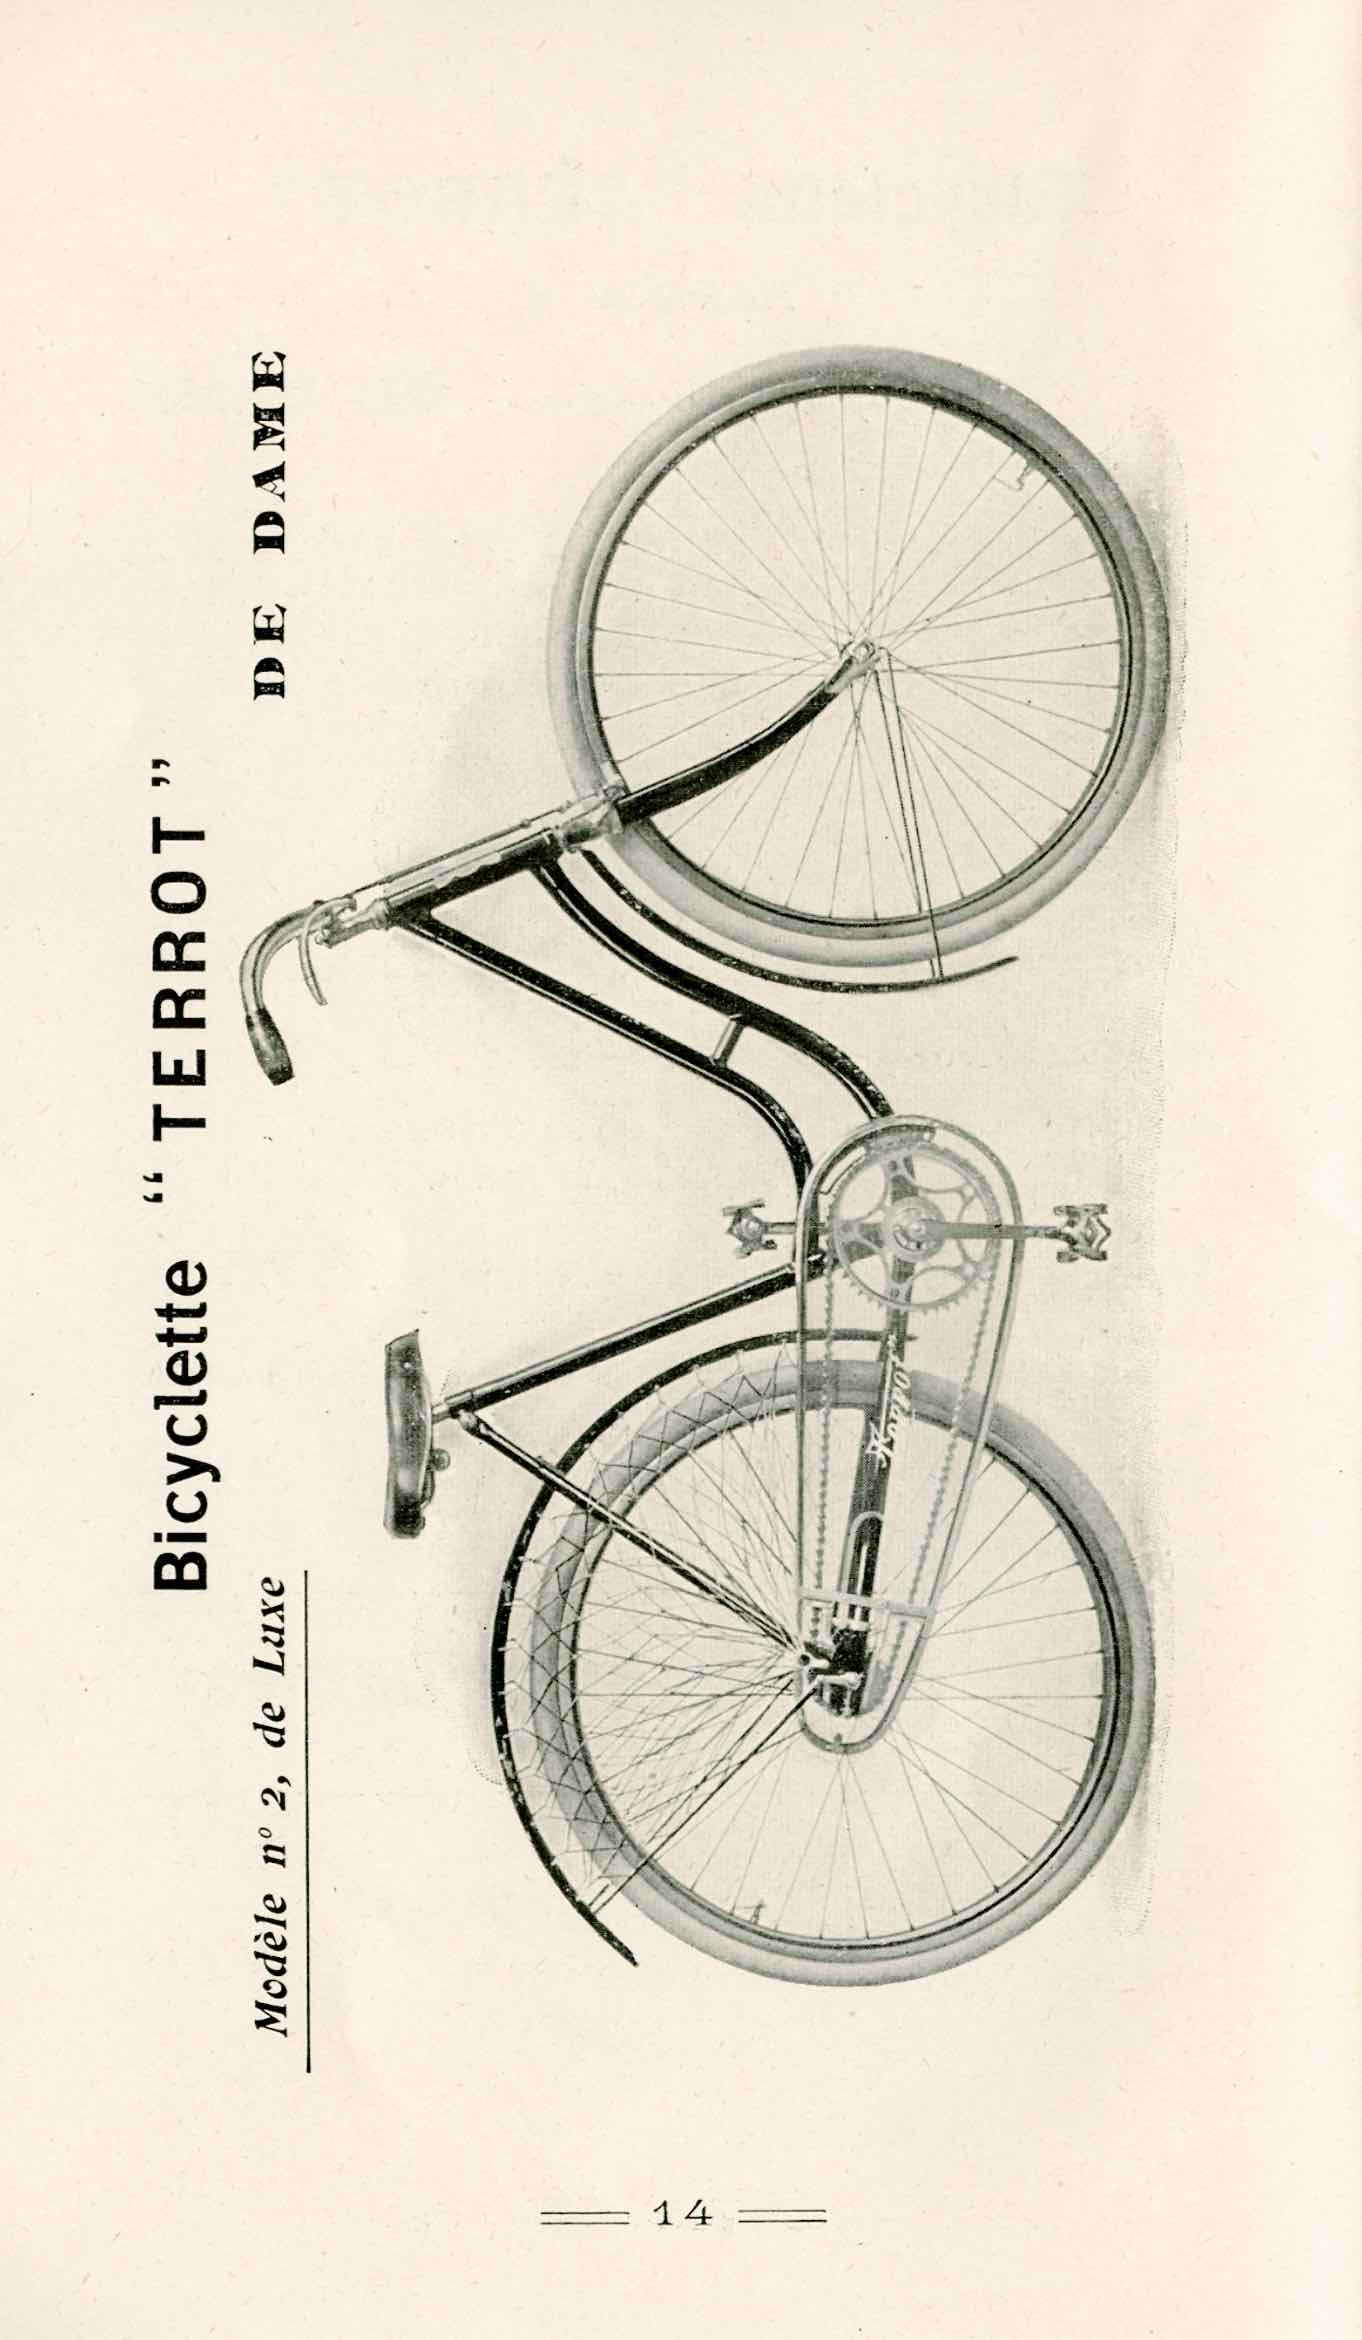 Terrot & Cie - Cycles & Motorcyclettes 1910 page 14 main image